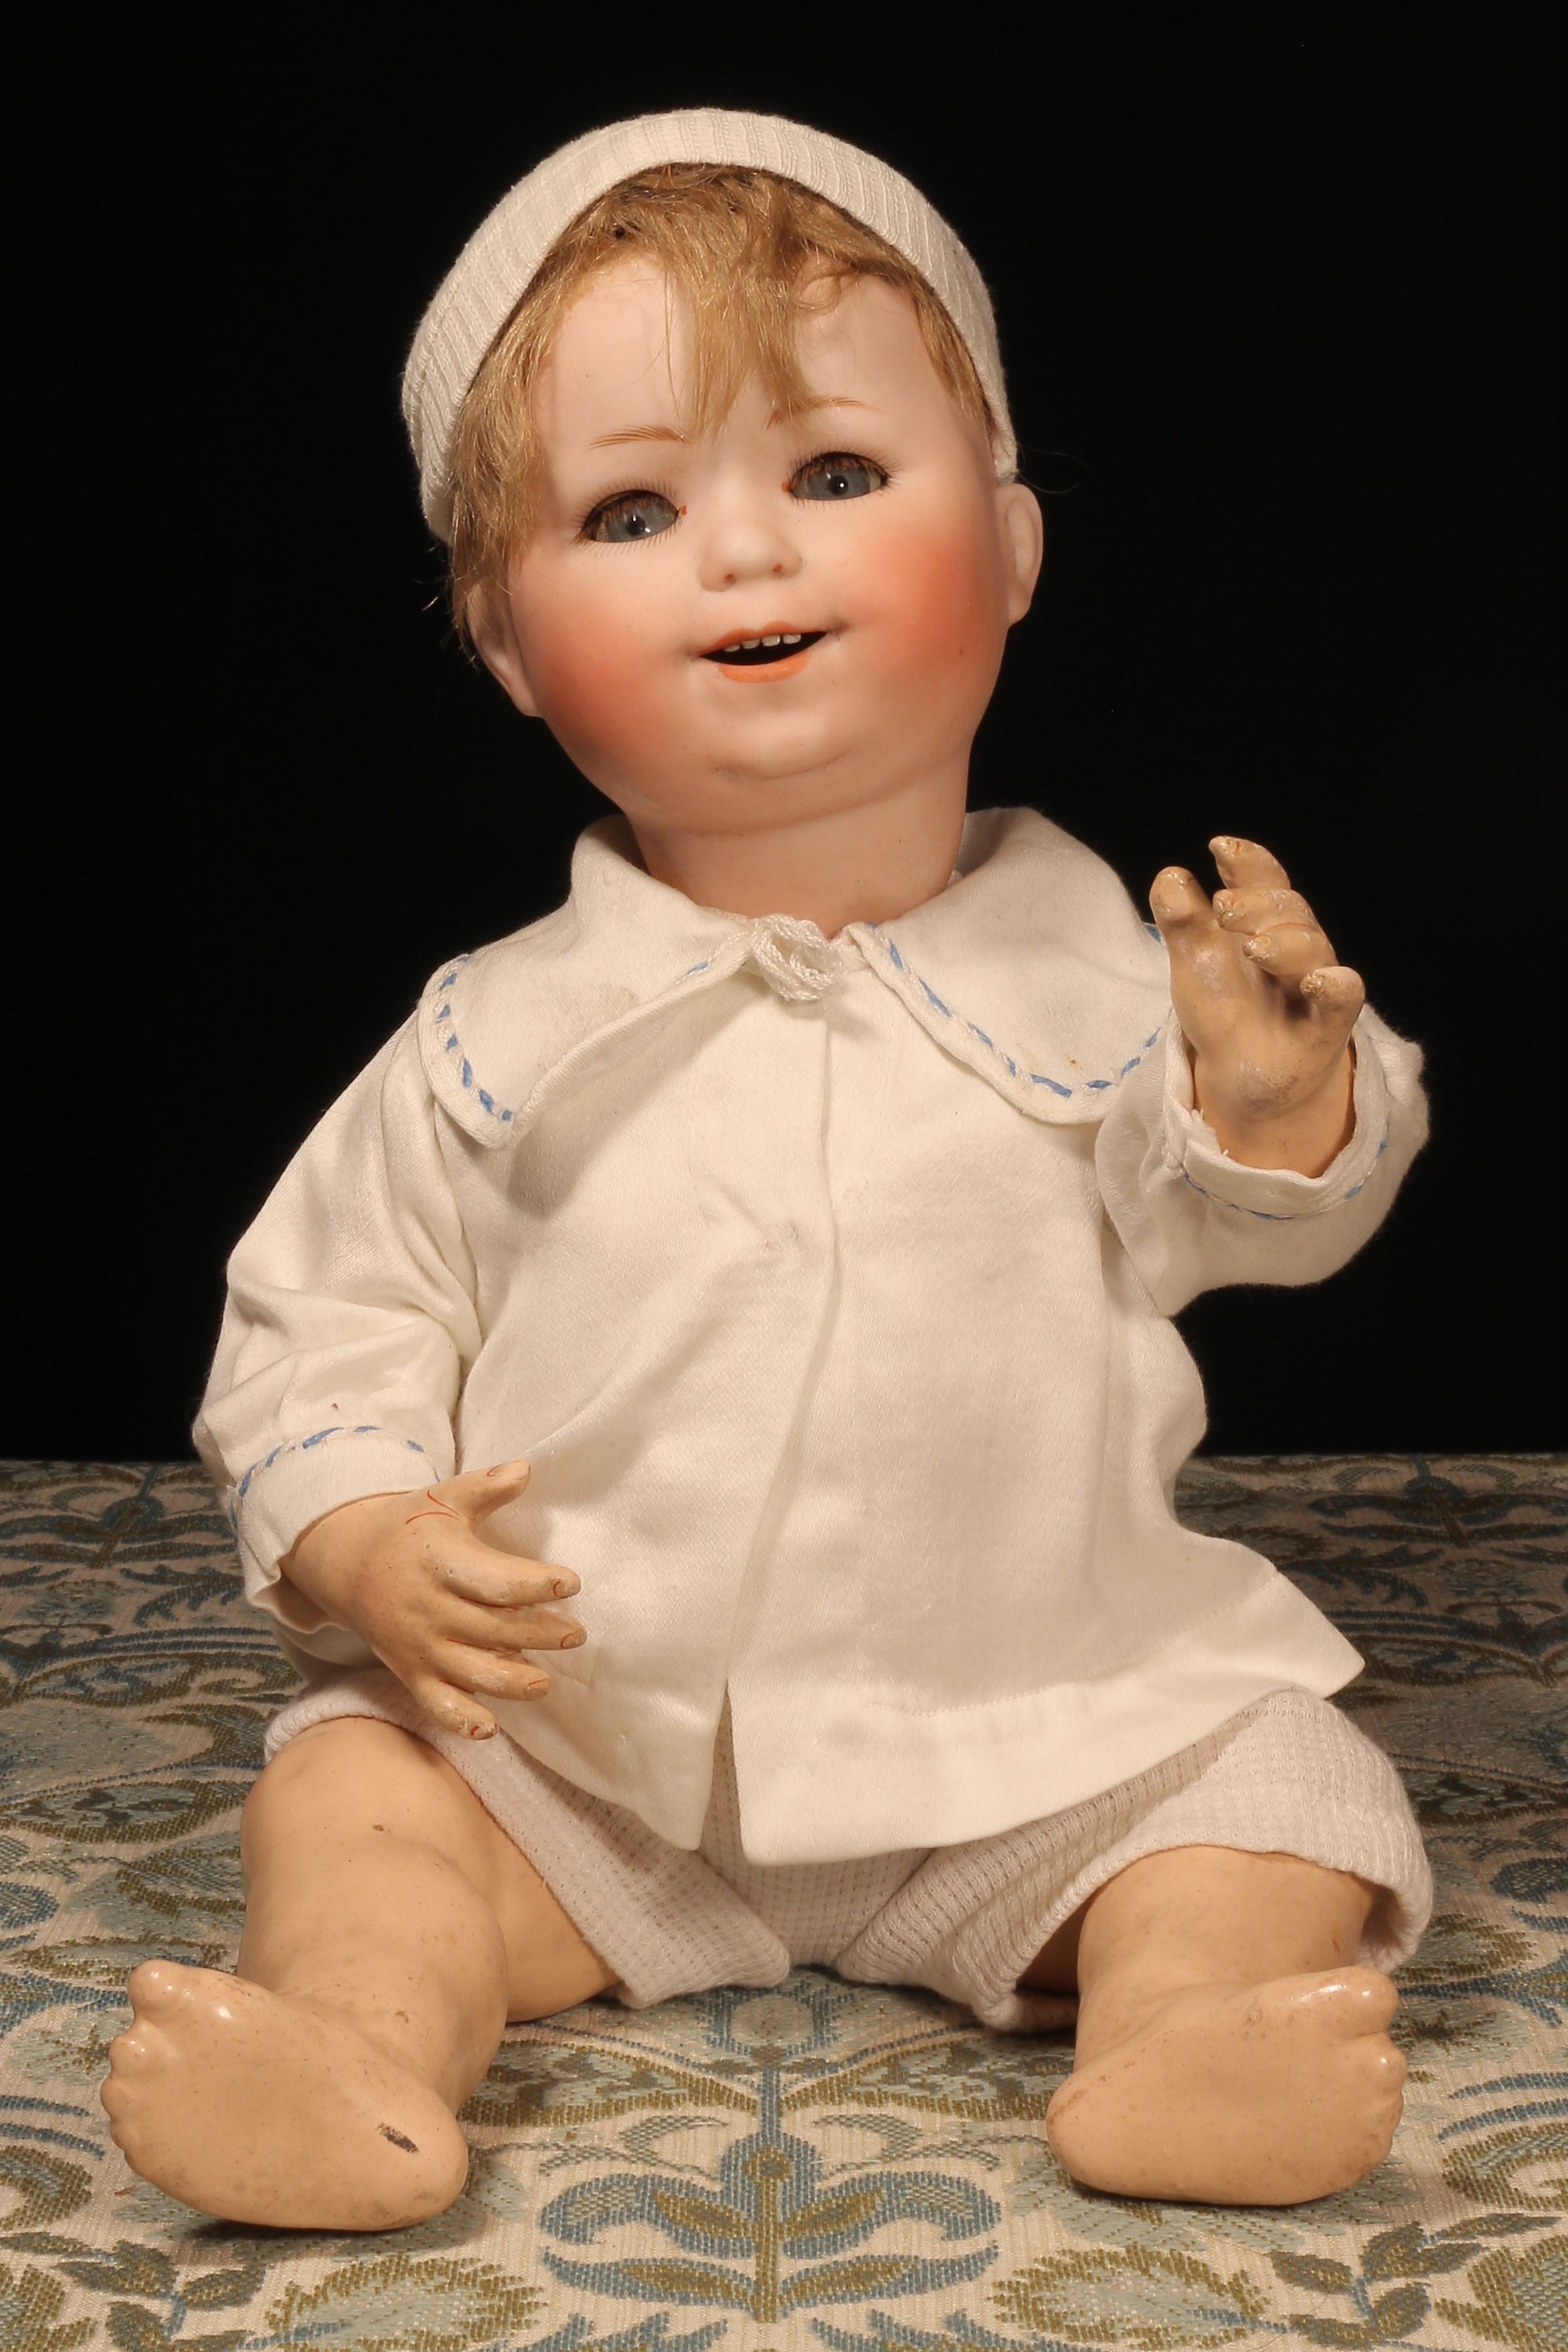 A William Goebel (Germany) bisque head and painted jointed composition bodied character doll, the